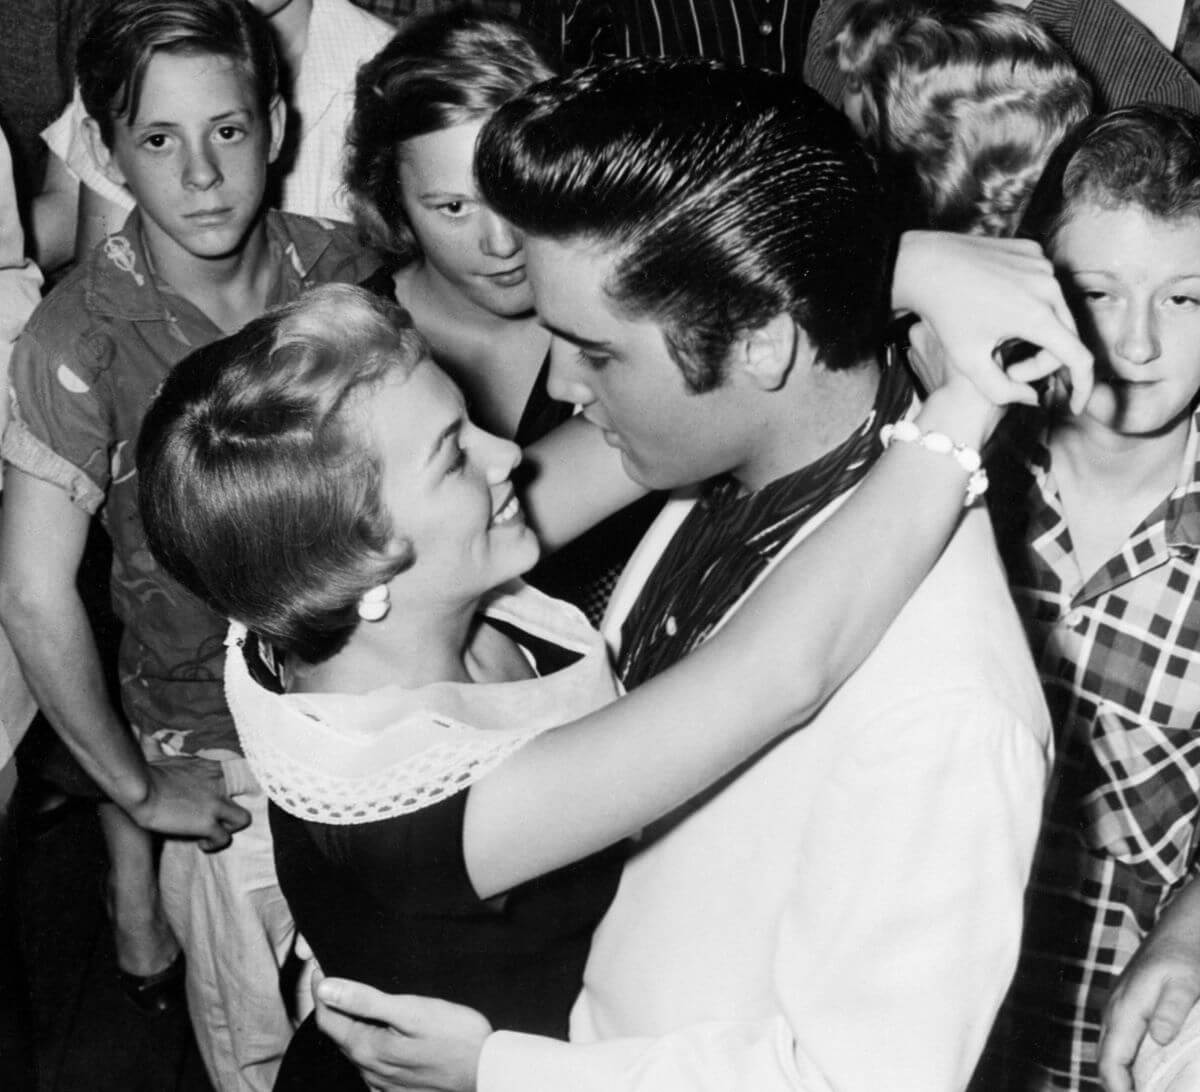 A black and white picture of Anita Wood dancing with her arms around Elvis' neck while a crowd of people watch.